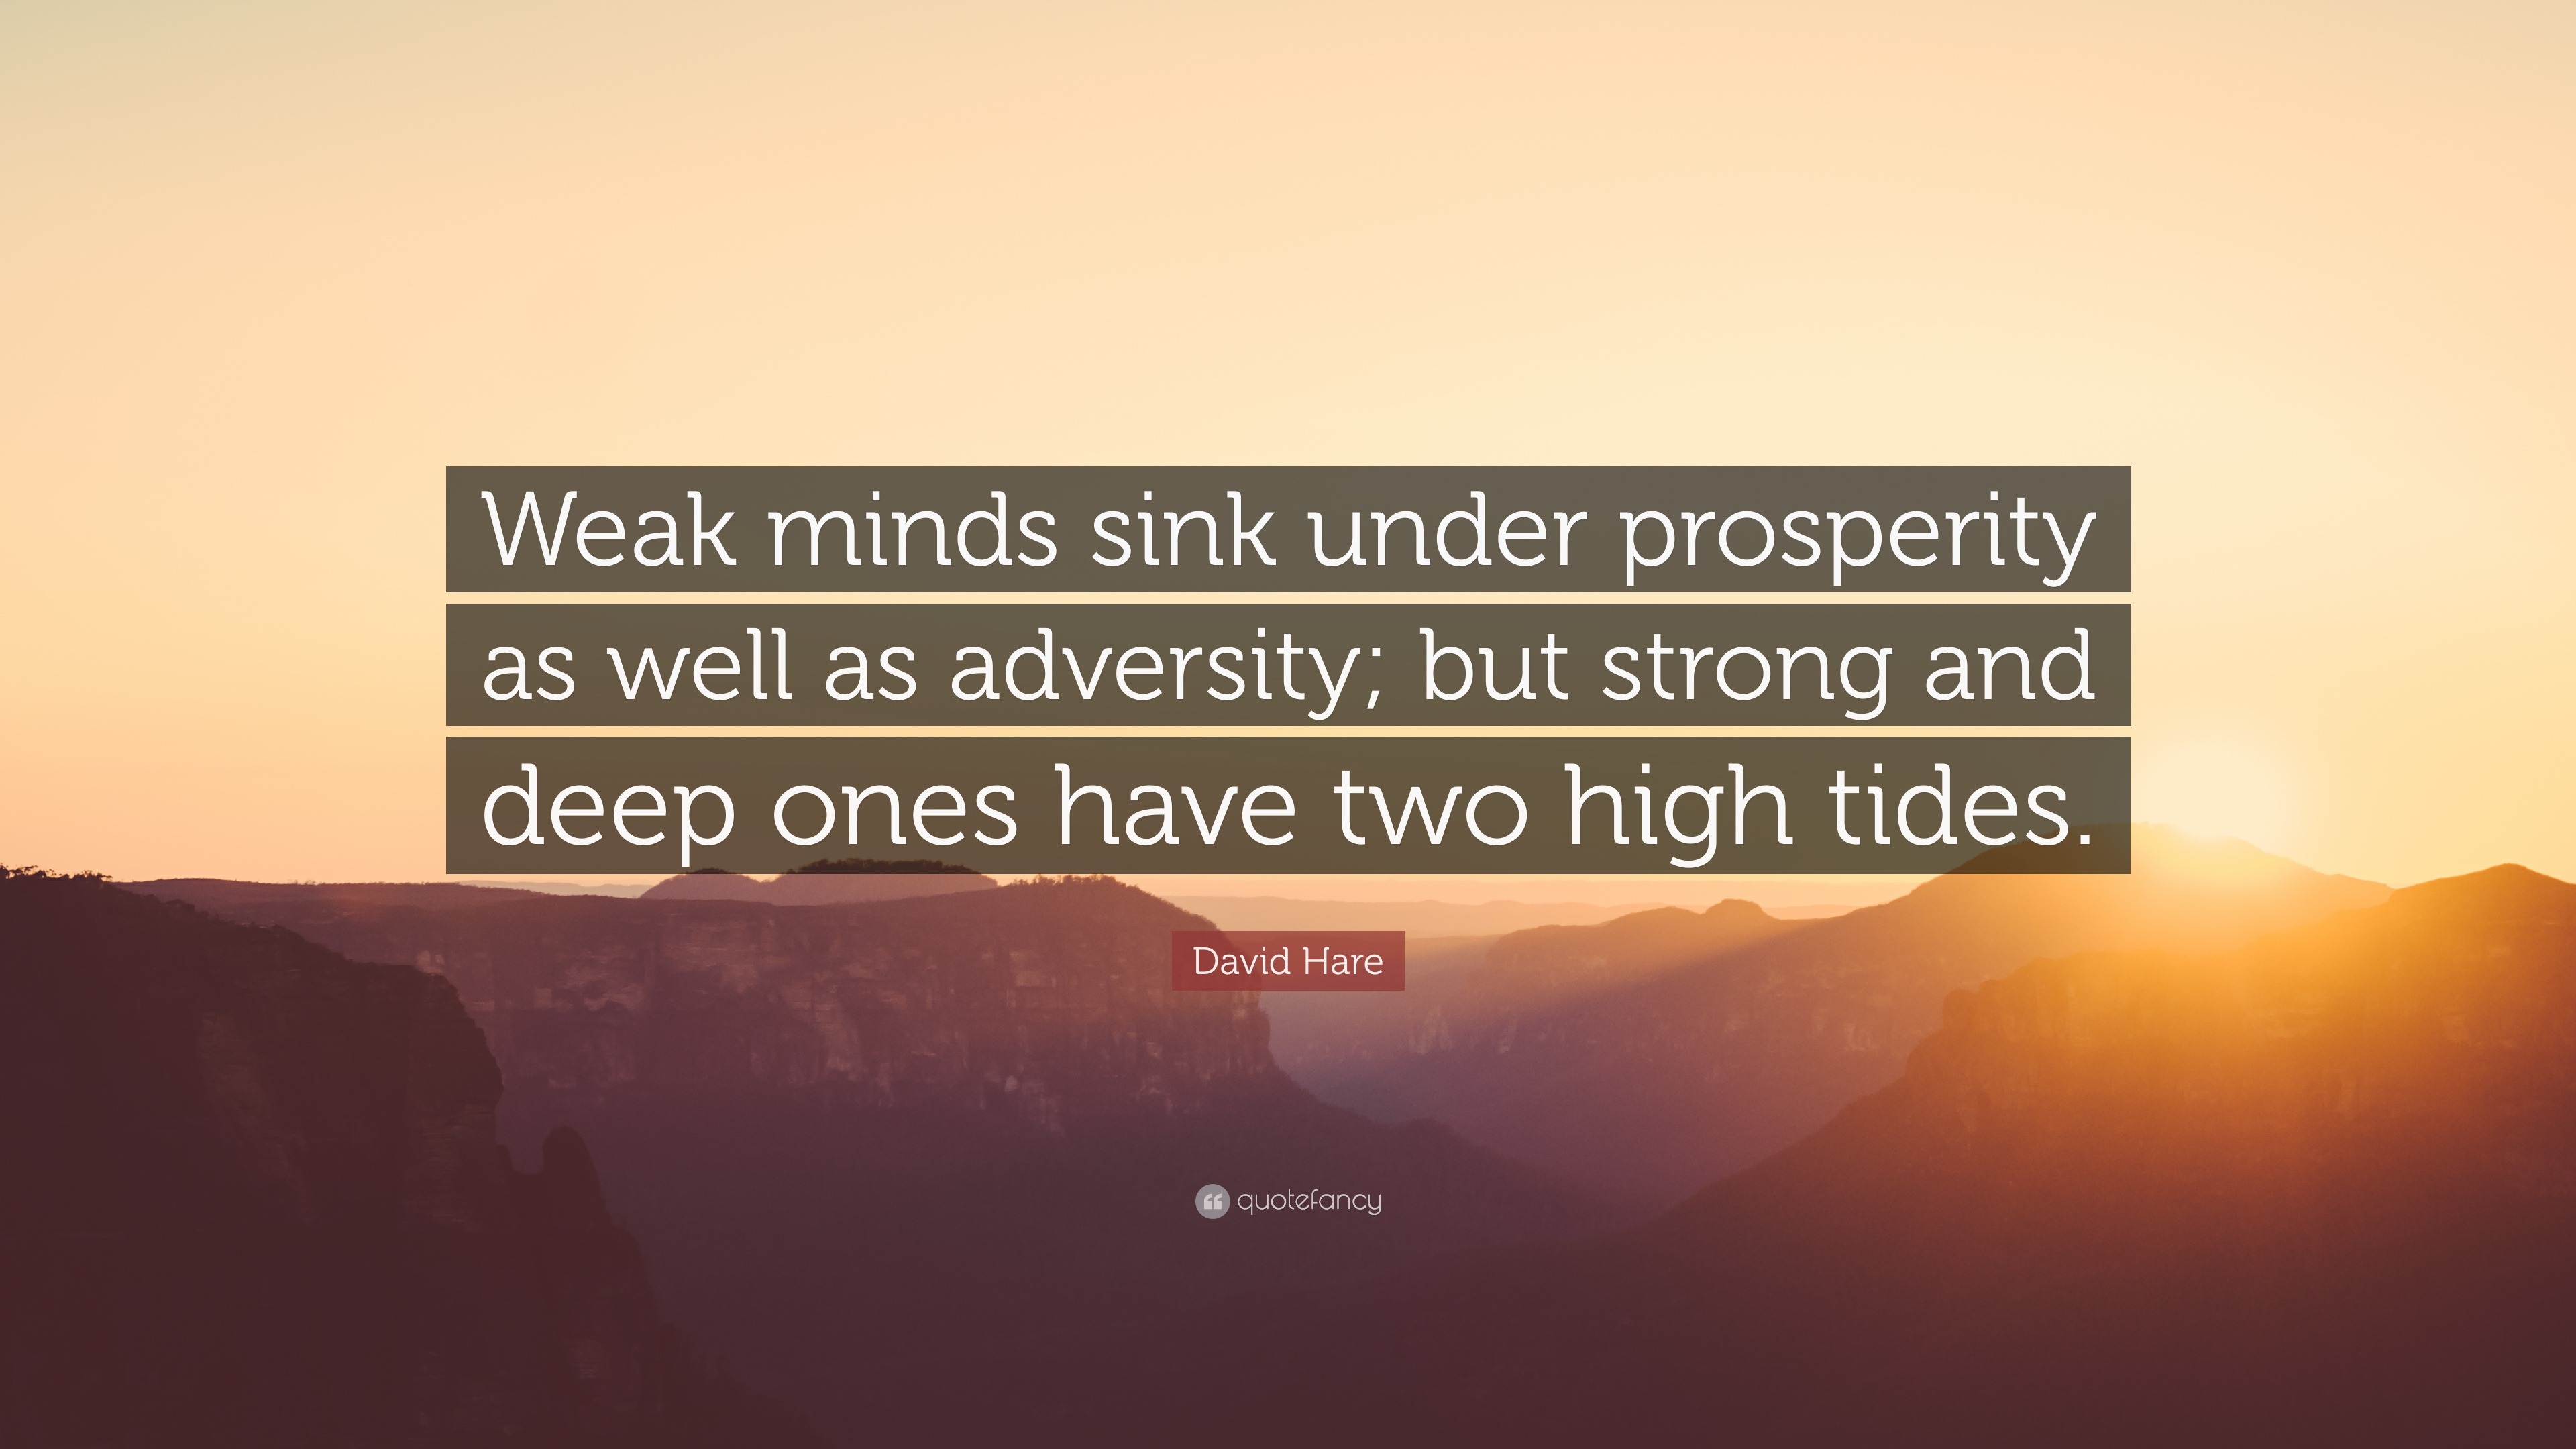 David Hare Quote: “Weak minds sink under prosperity as well as adversity;  but strong and deep